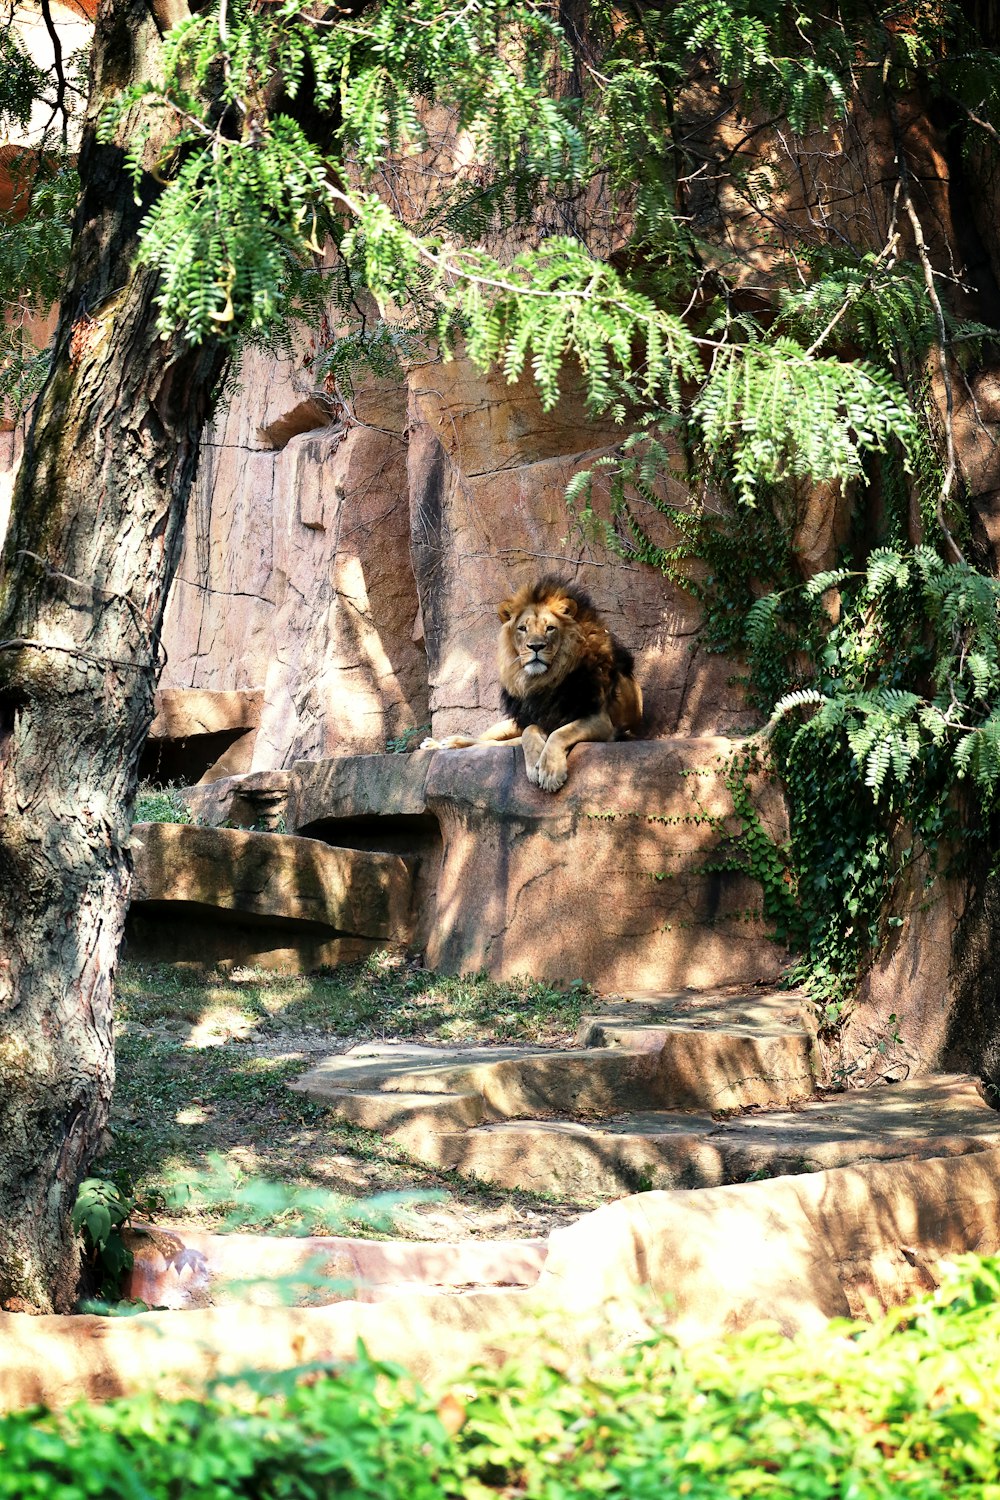 a lion resting on a rock in a zoo enclosure